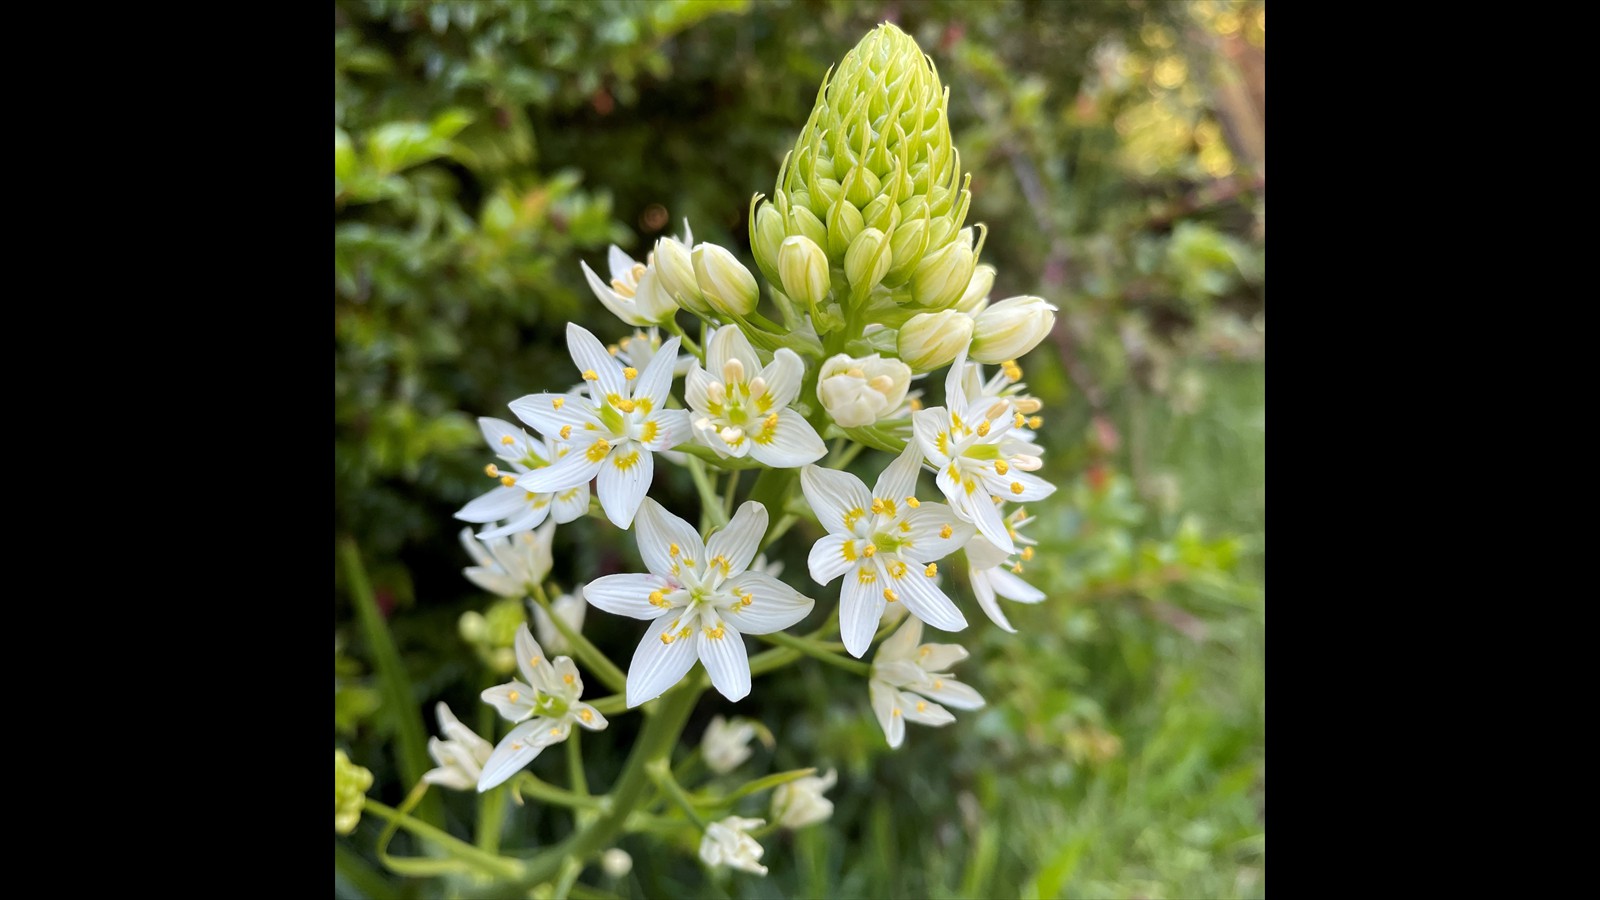 Fremont's Star Lily aka Death Camas, Toxicoscordion fremontii, c 2022 by Perry Hoffman